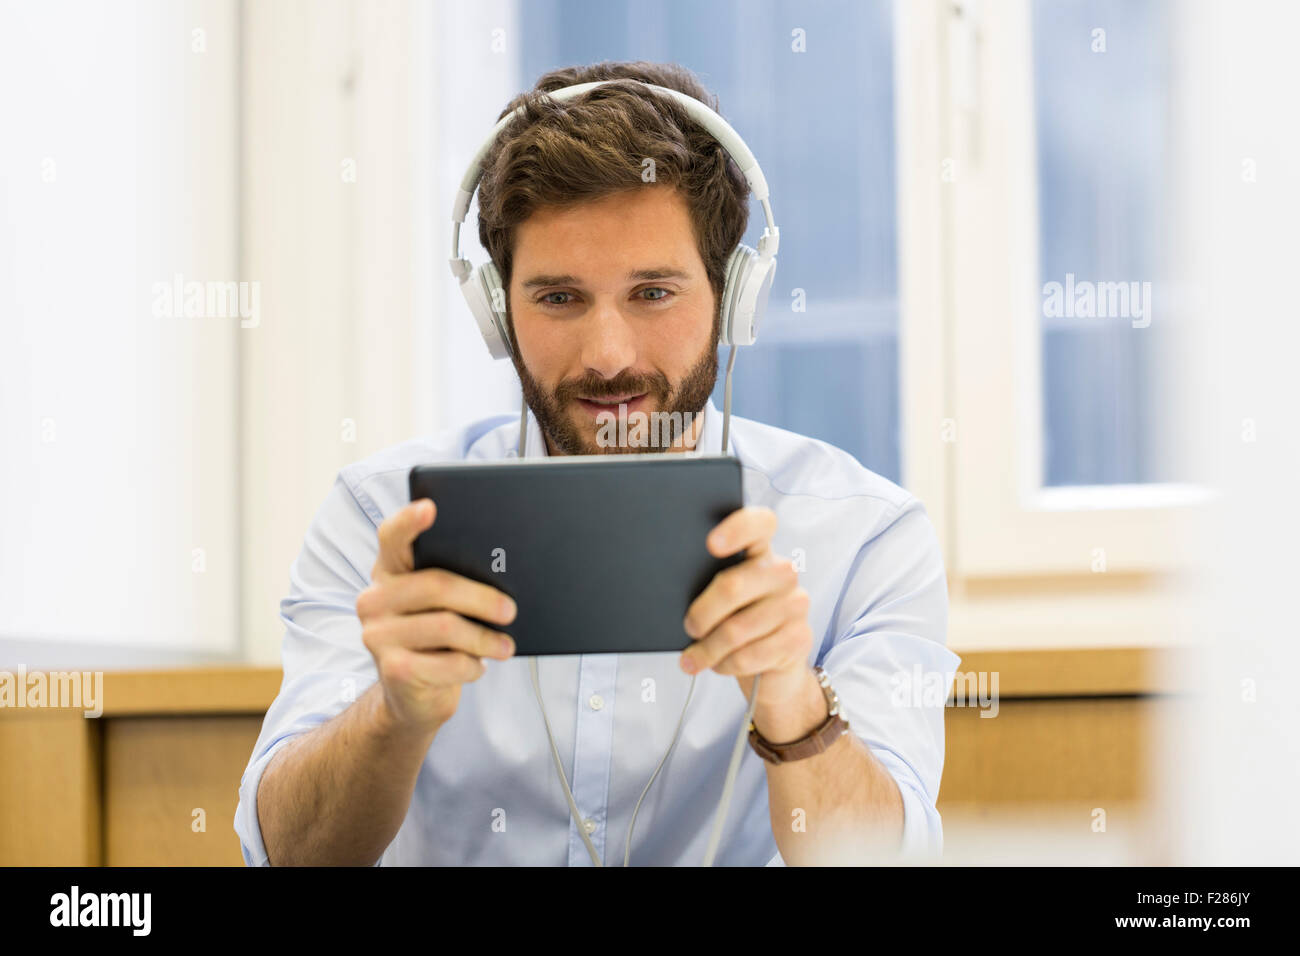 Creative businessman listening to headphones and using digital tablet. Stock Photo